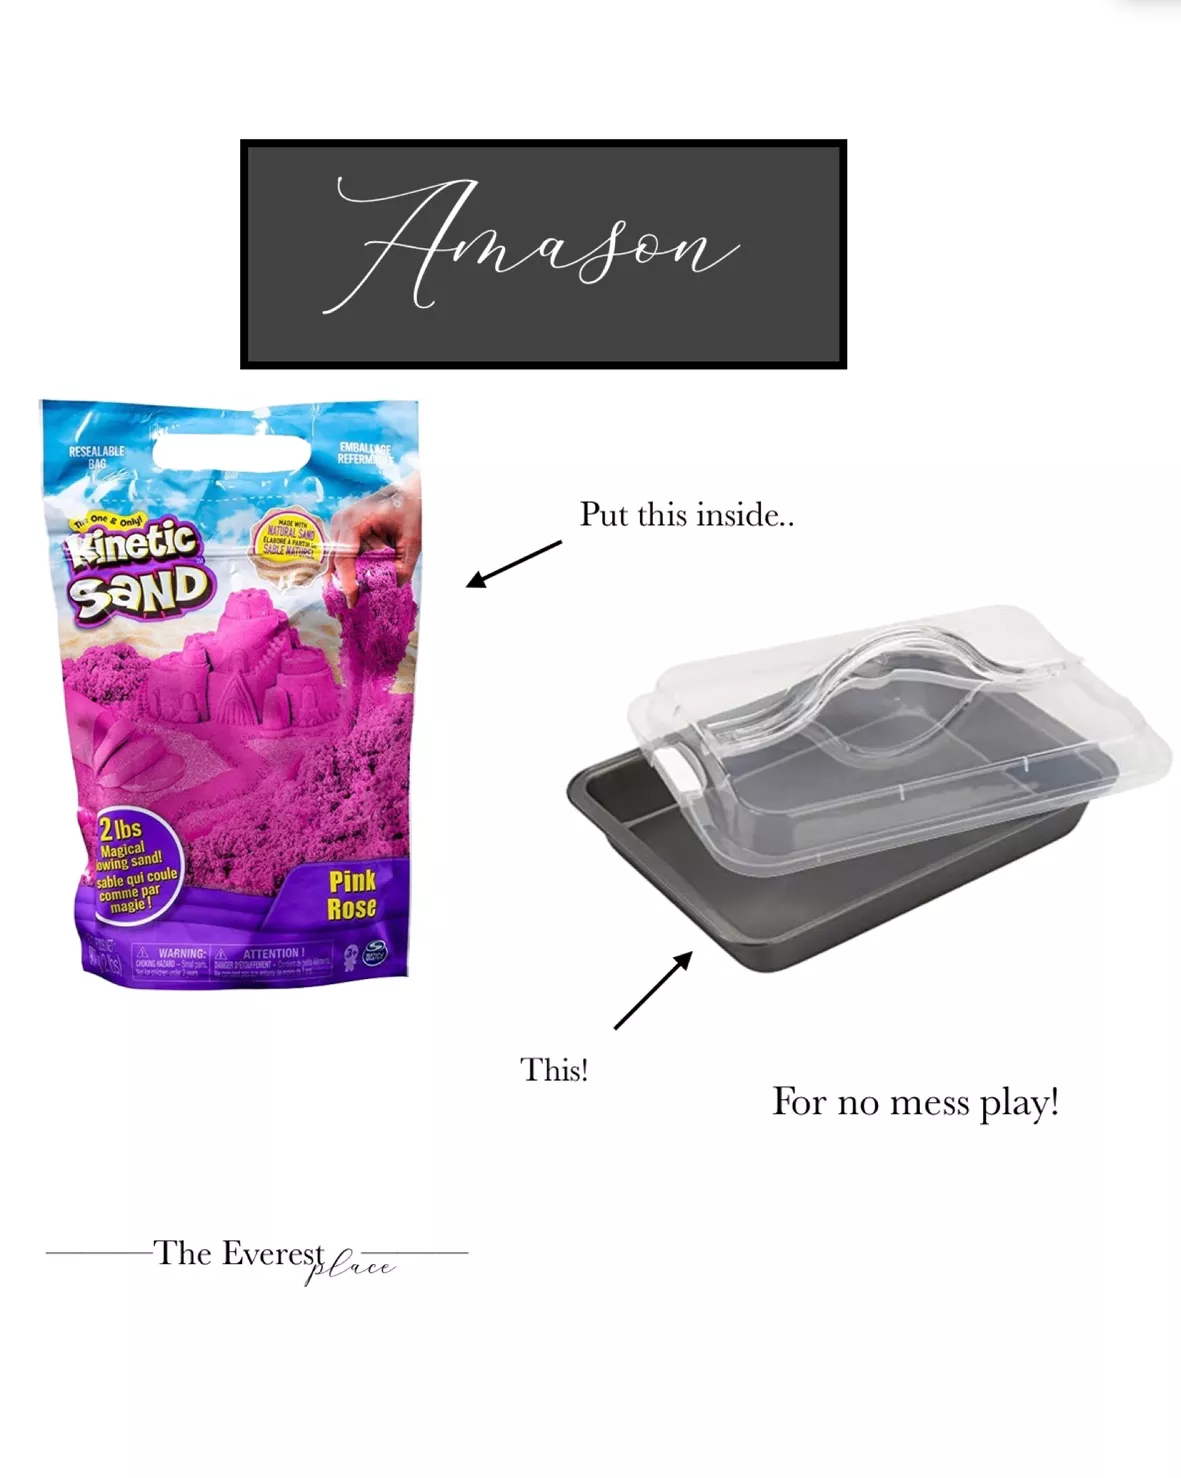 Kinetic Sand, The Original … curated on LTK